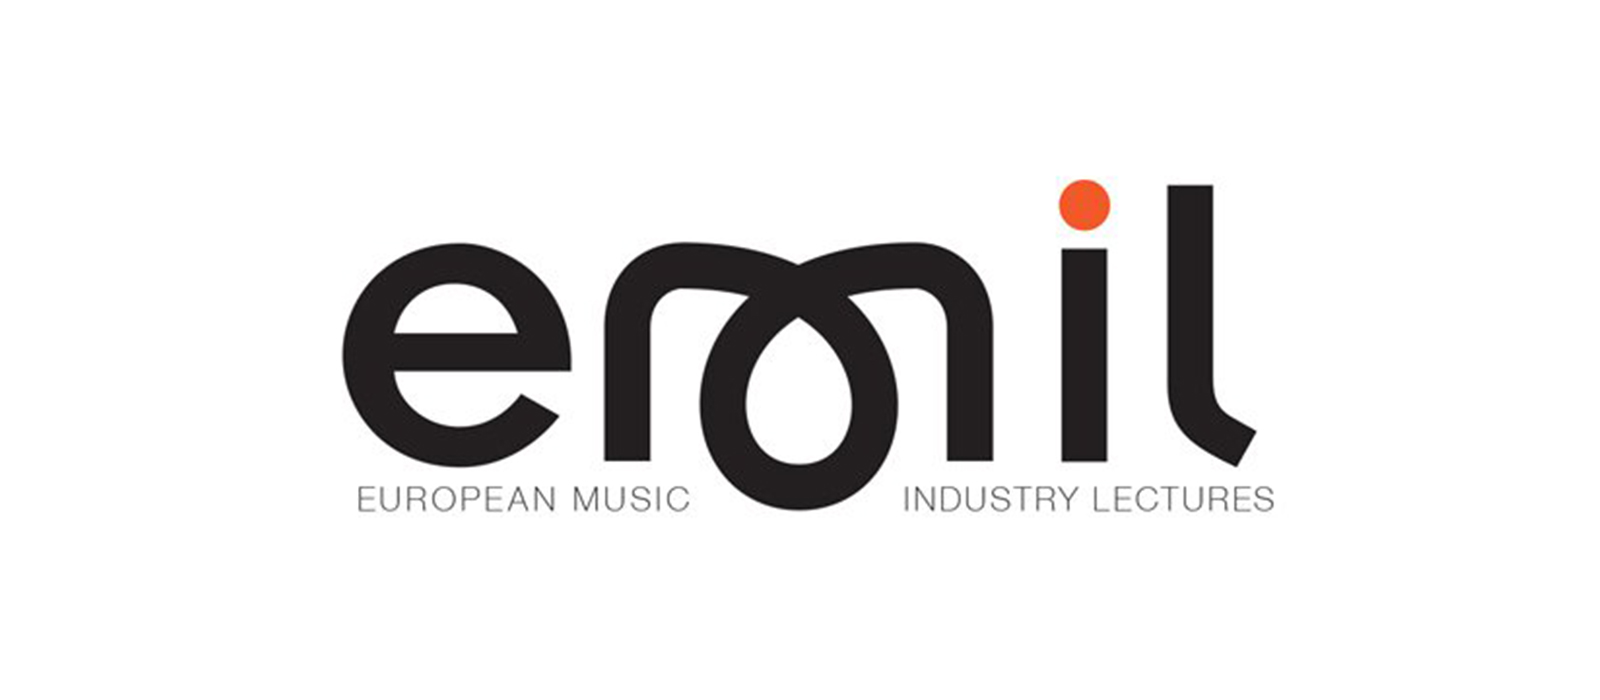 E.M.I.L. (European Music Industry Lectures): first Ableton certified training center in the Rhône-Alpes region!